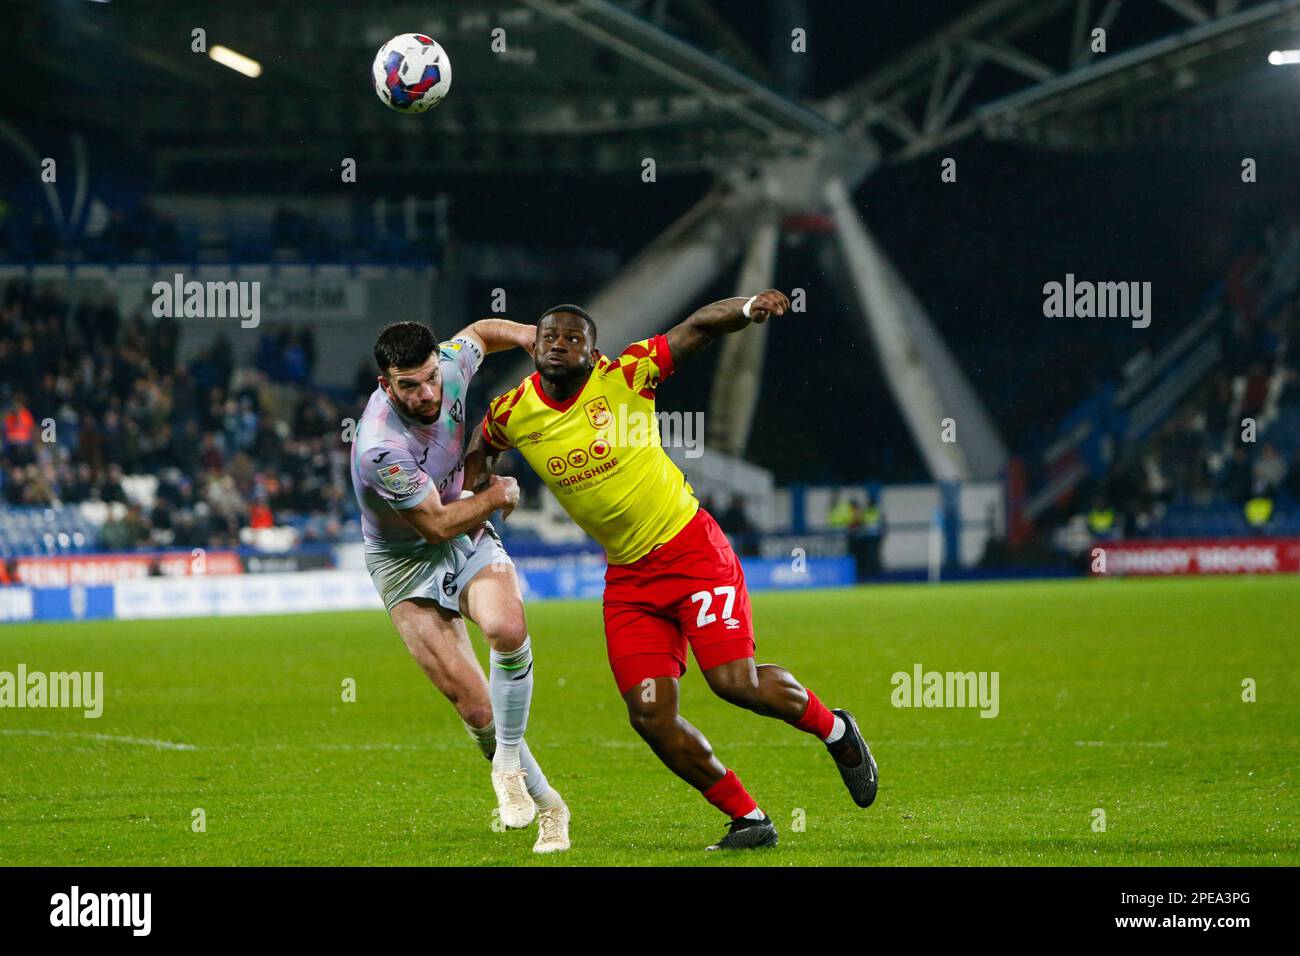 Huddersfield, UK. 15th Mar, 2023. Tyreece Simpson #27 of Huddersfield Town and Grant Hanley #5 of Norwich City during the Sky Bet Championship match Huddersfield Town vs Norwich City at John Smith's Stadium, Huddersfield, United Kingdom, 15th March 2023 (Photo by Ben Early/News Images) Credit: News Images LTD/Alamy Live News Stock Photo